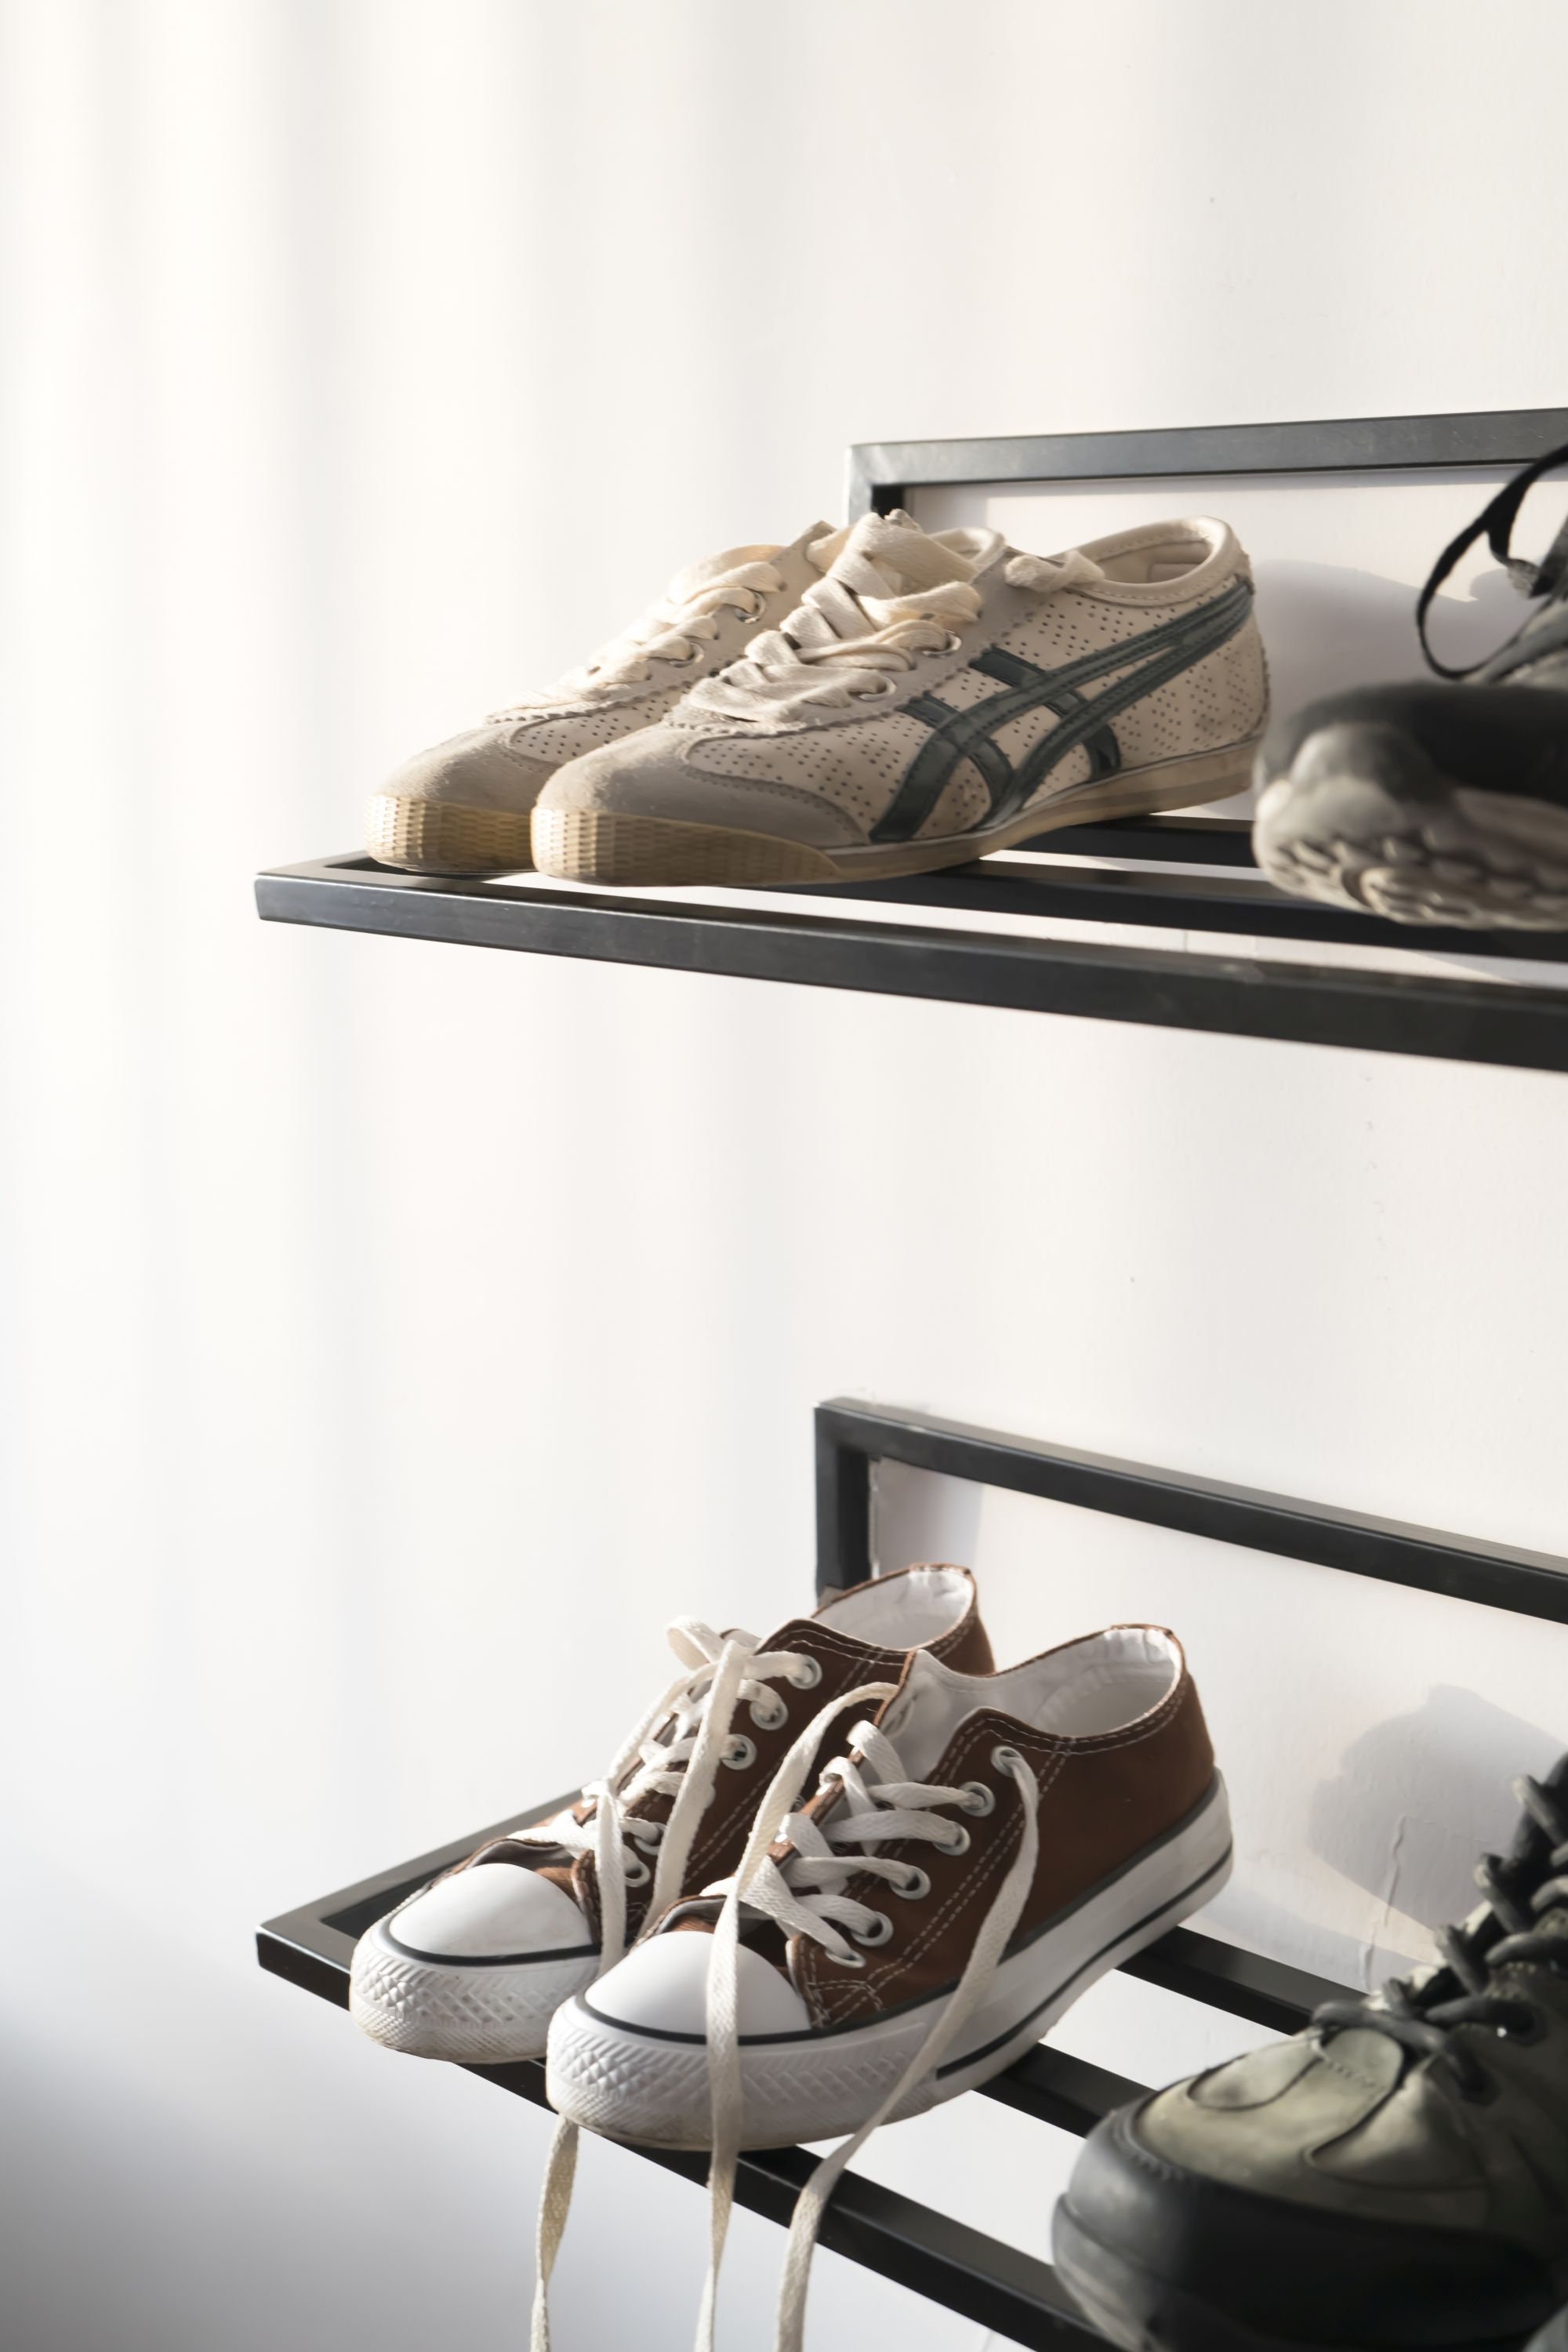 Wall Mount Metal Shoe Rack, Entryway Organization for Shoes